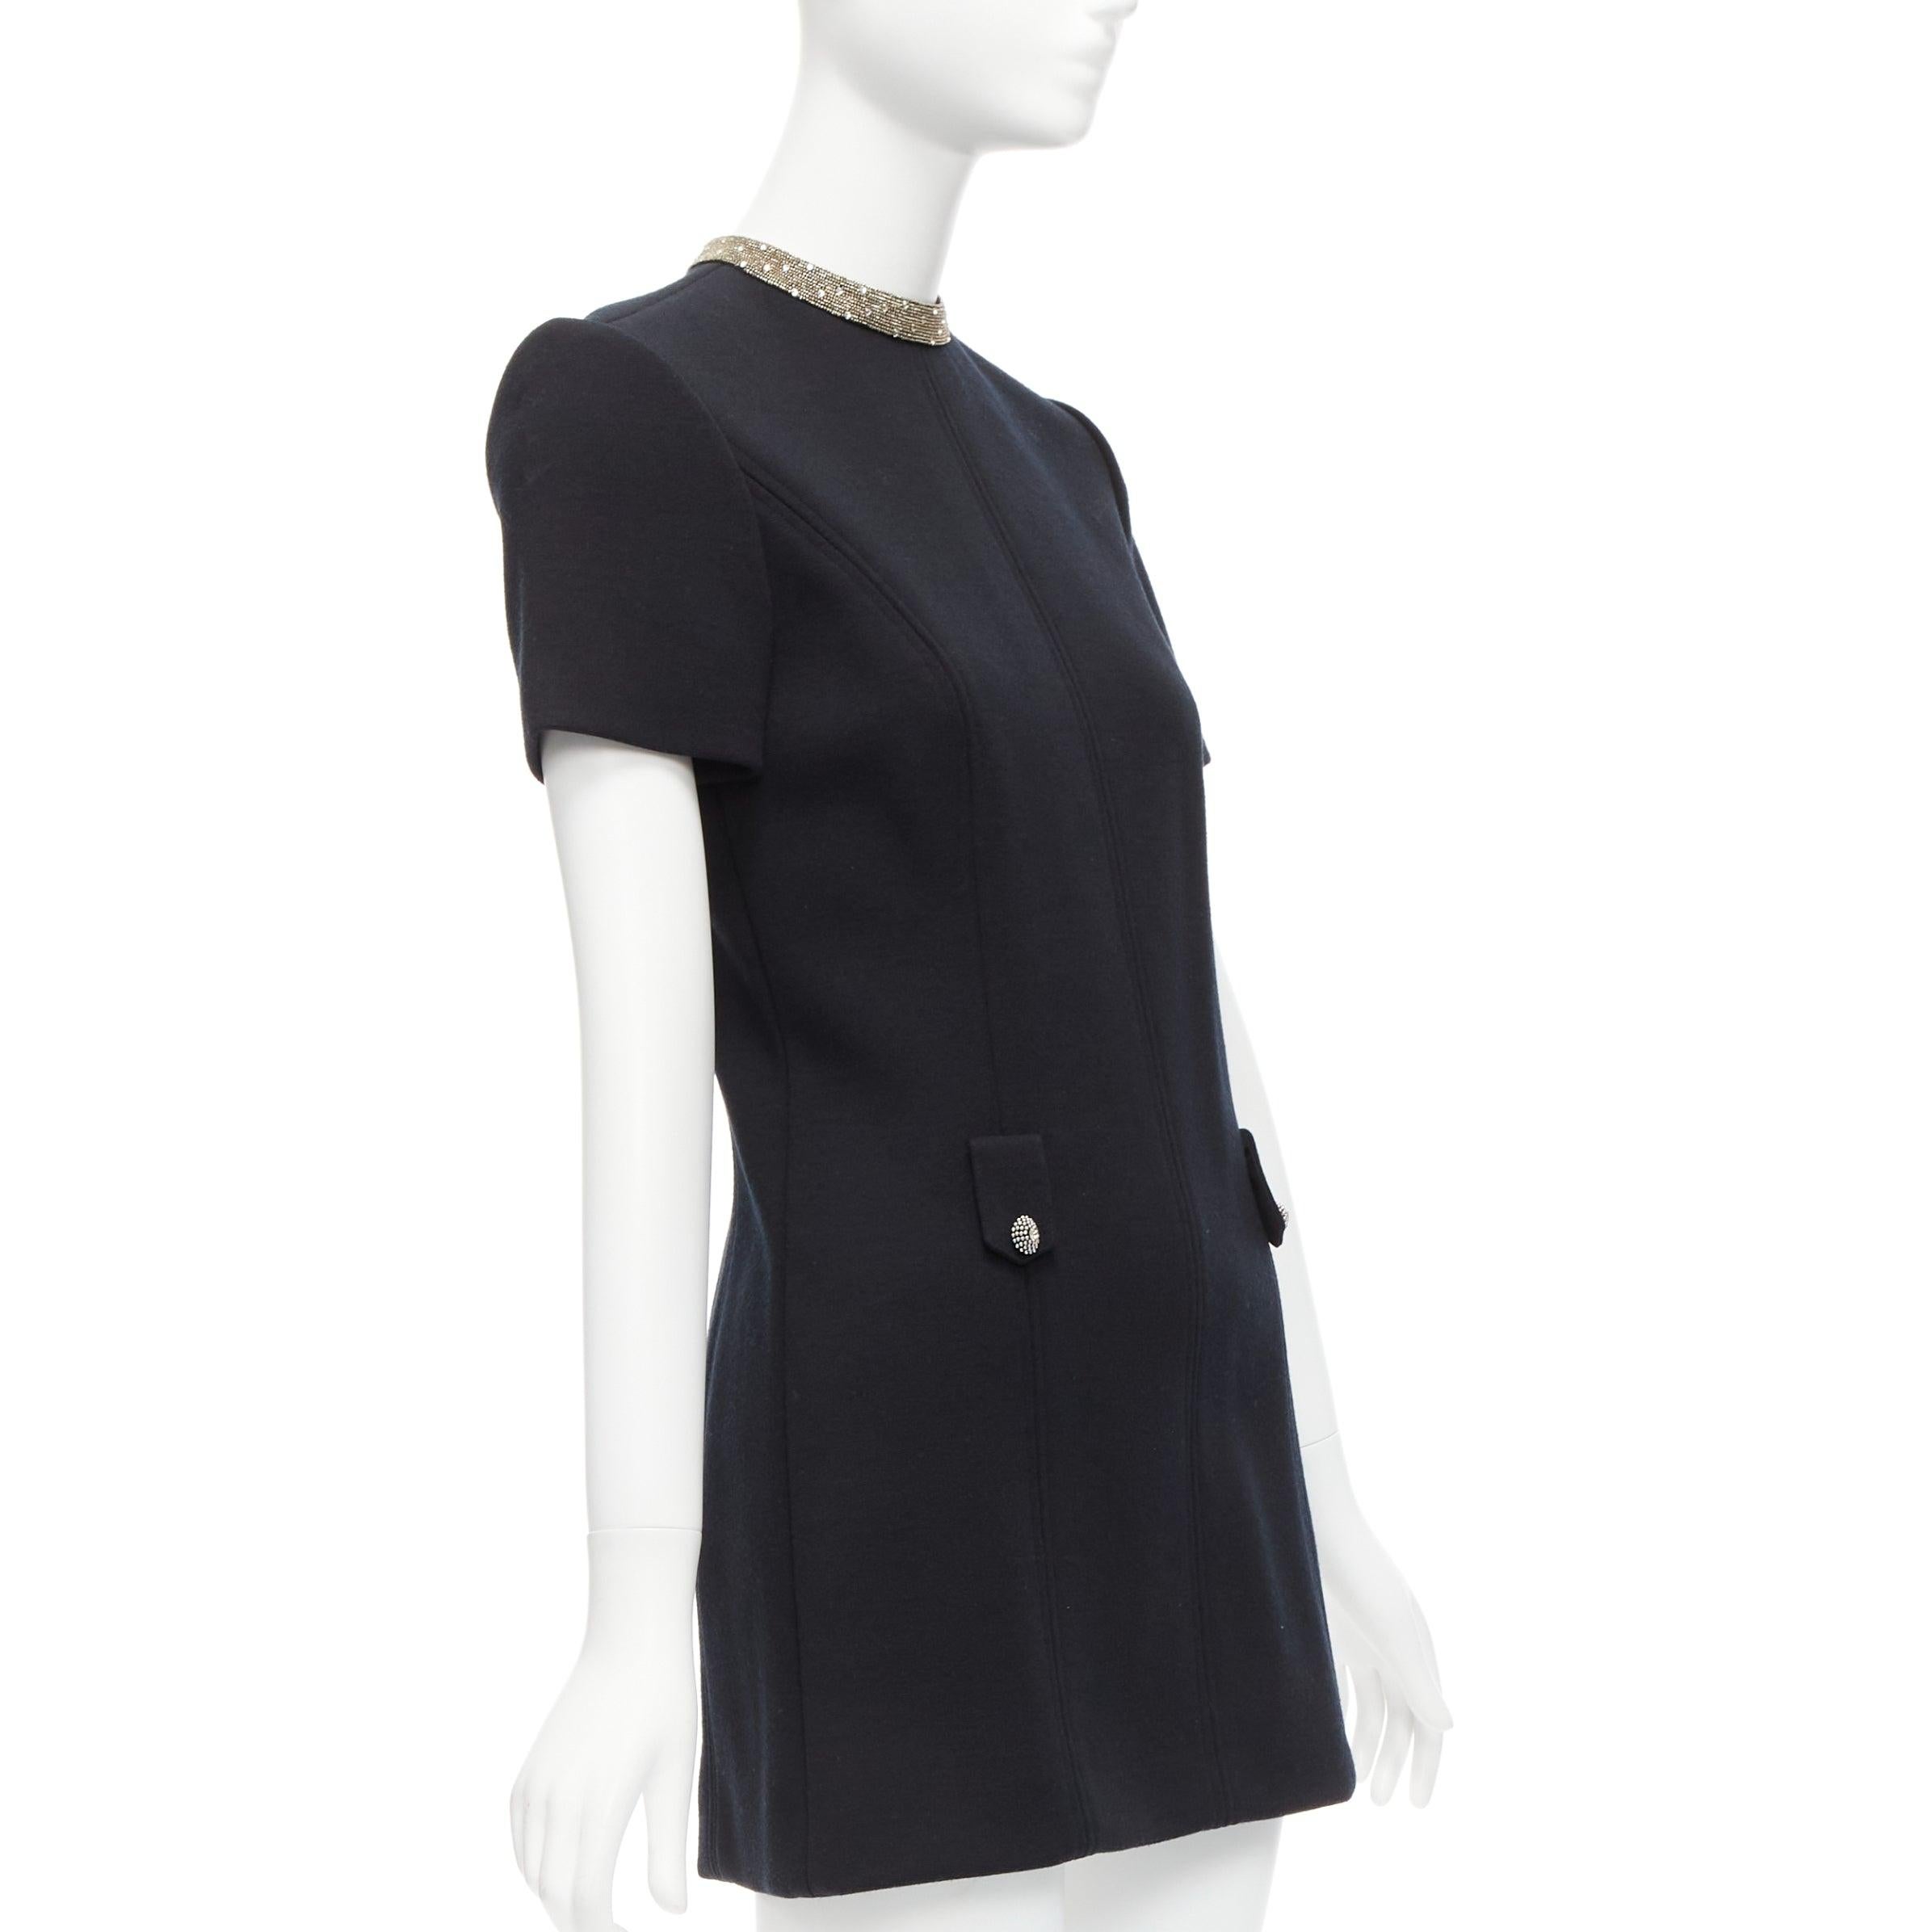 SAINT LAURENT black 100% wool diamante collar silk lined shift dress FR36 S
Reference: AAWC/A00680
Brand: Saint Laurent
Designer: Anthony Vaccarello
Material: Wool
Color: Black, Silver
Pattern: Solid
Closure: Zip
Lining: Black Silk
Extra Details: